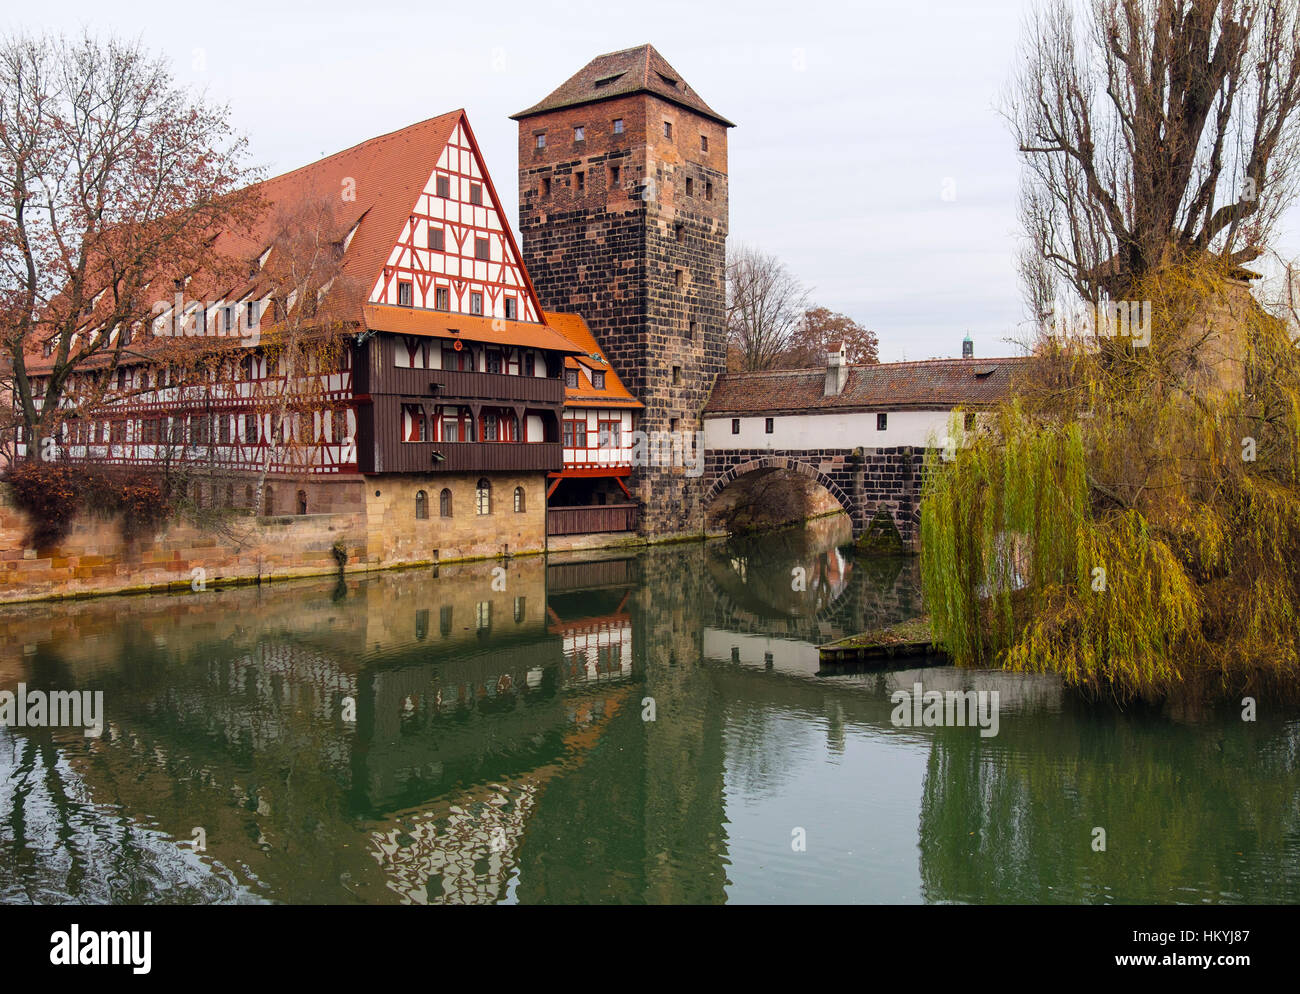 15thc Weinstadle timbered building now student's hall of residence and Henkersteg or Hangman's Bridge over Pegnitz River. Nuremberg, Bavaria, Germany Stock Photo